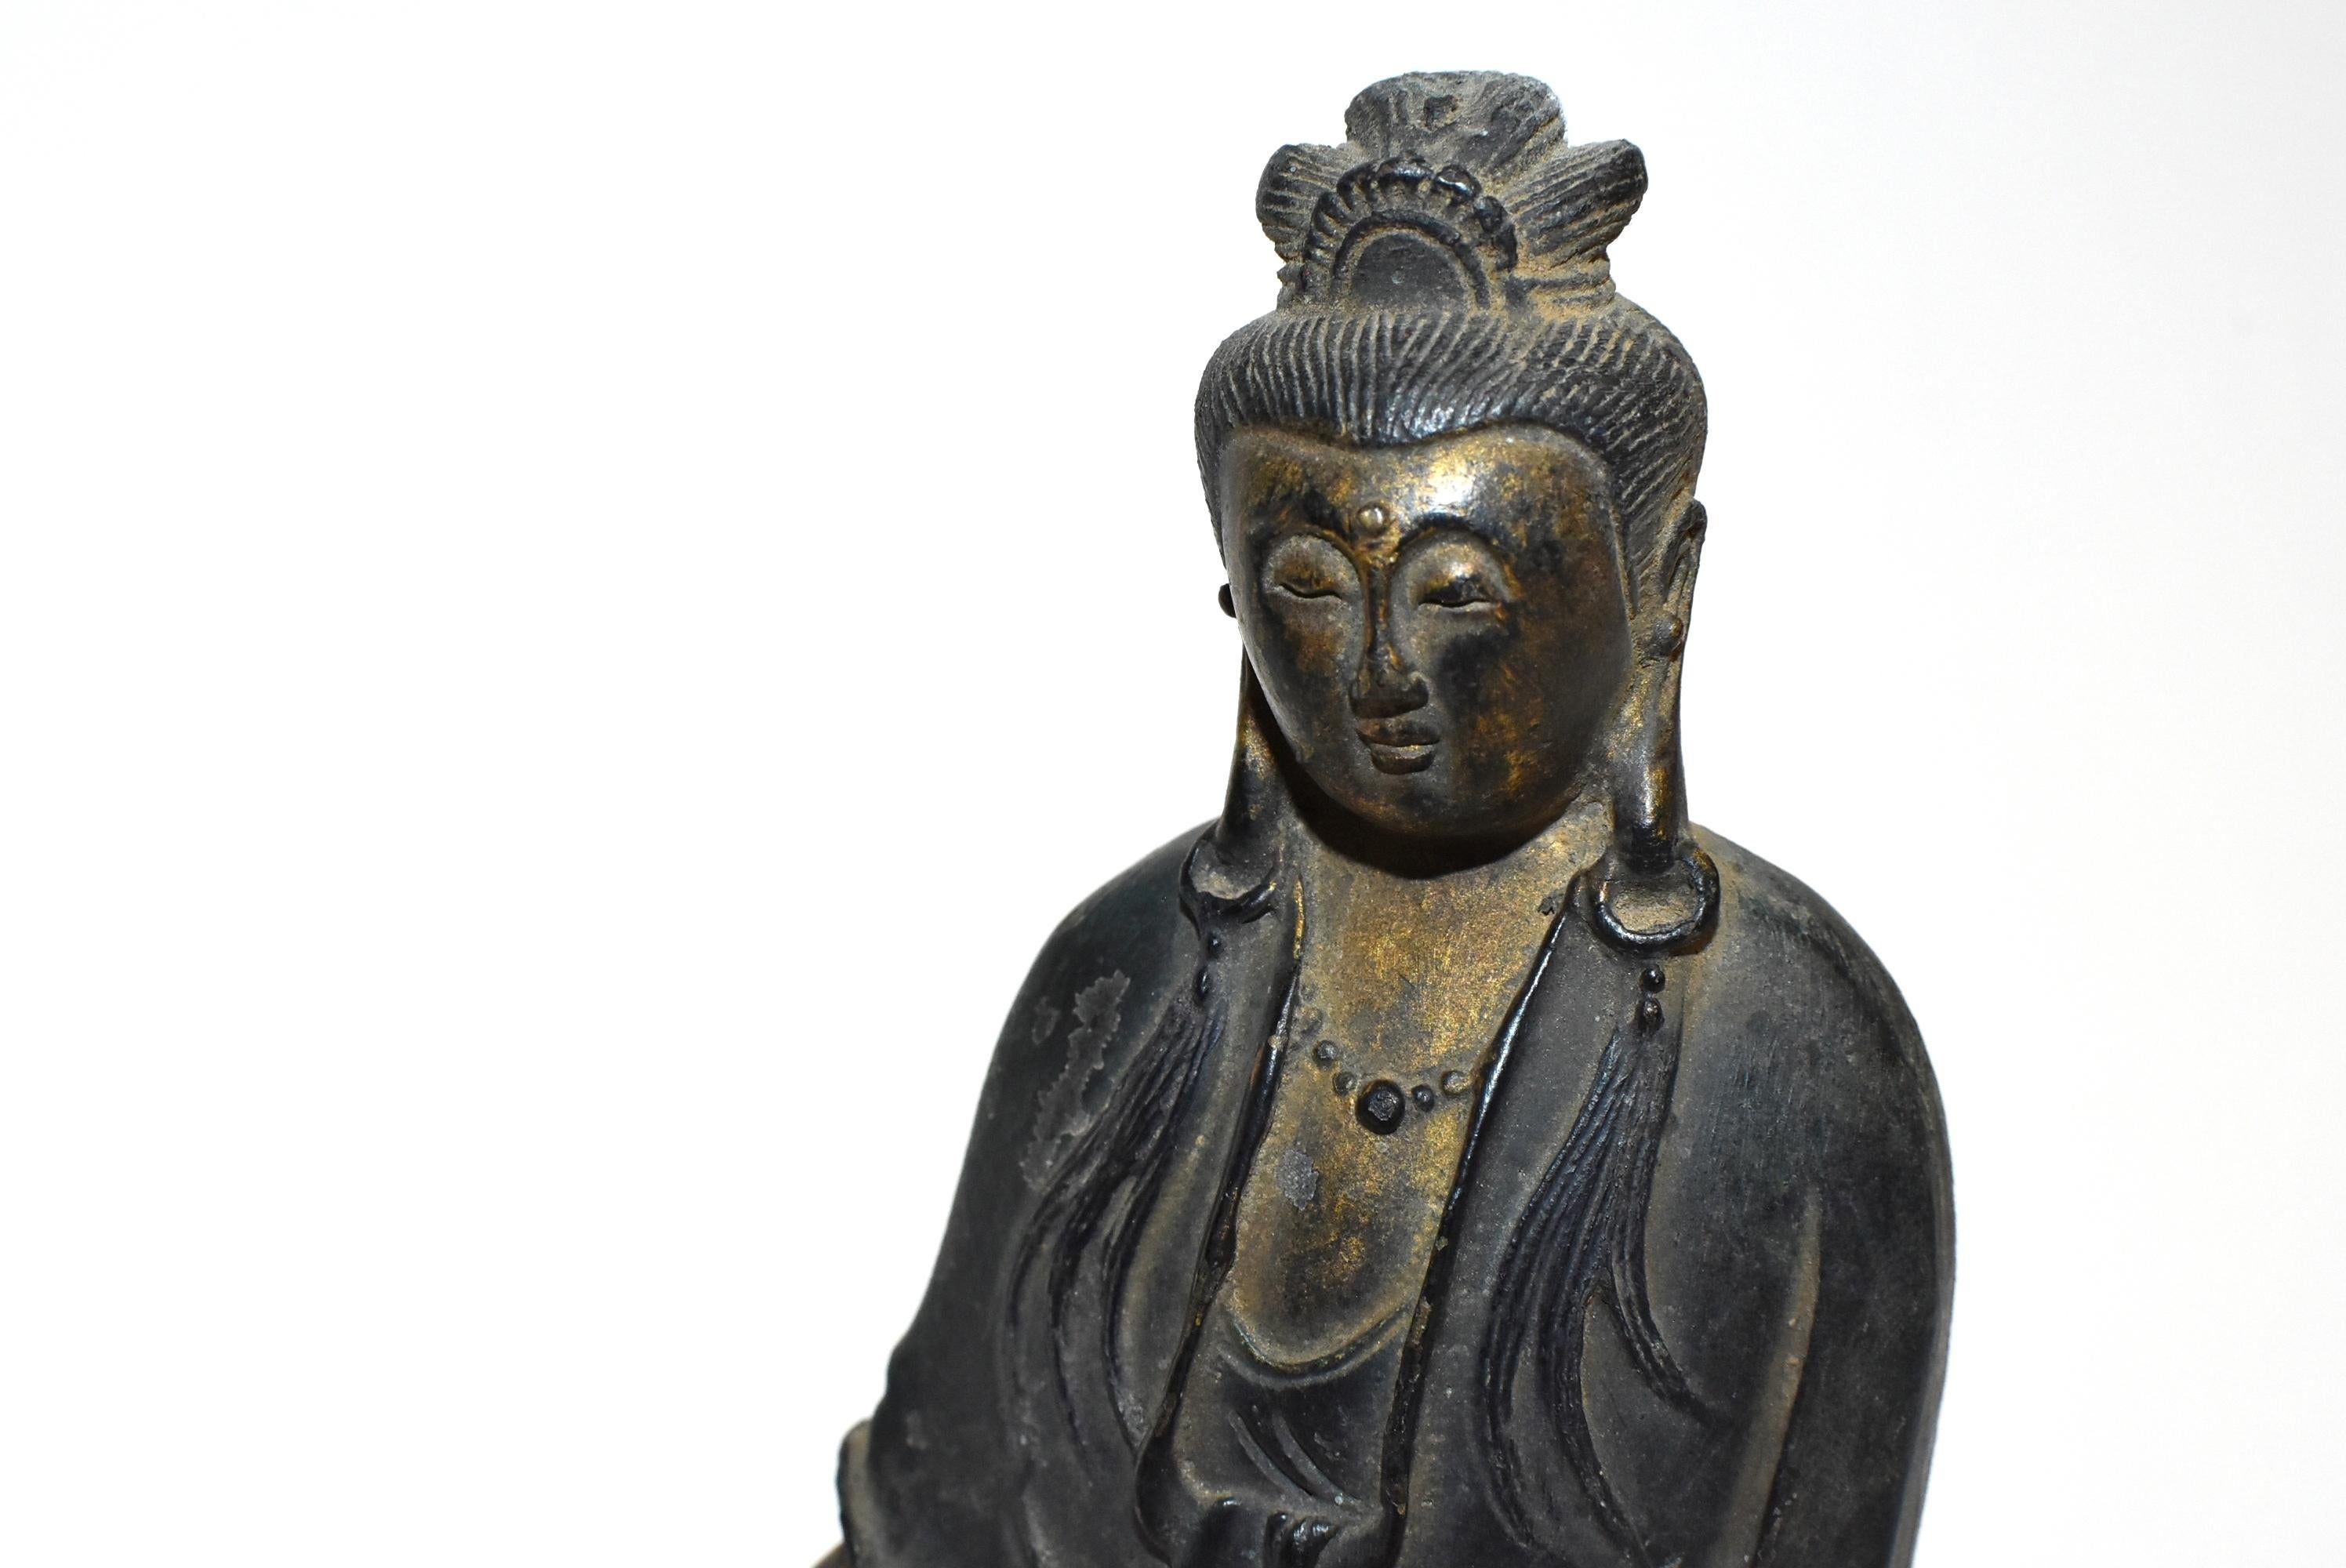 A very refined 19th century polychrome bronze guan yin statue. The graceful figure wears an elegantly draped robe and beaded necklace. The sensuous full faces with eyes casting a serene and meditative aura, below evenly arched eyebrows, the forehead